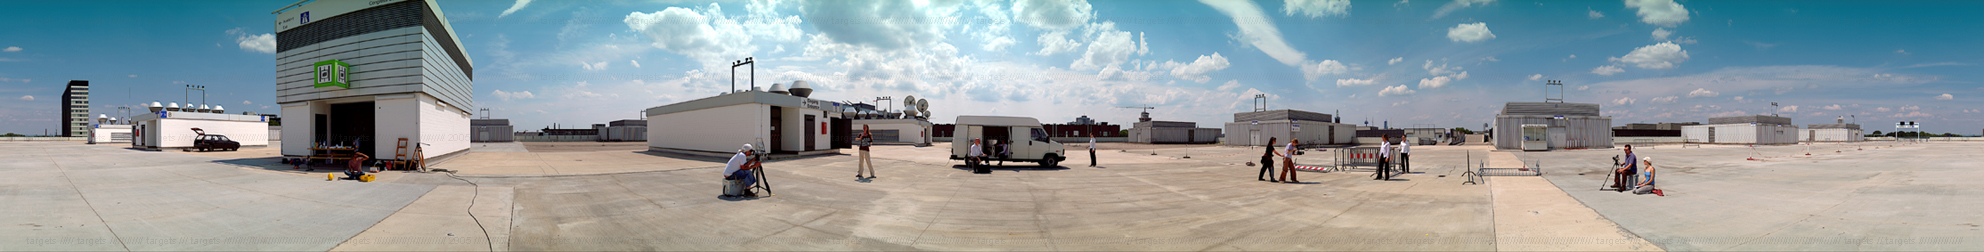 panorama picture of a urban sunny landscape with human figures posing, taking photos and shooting video